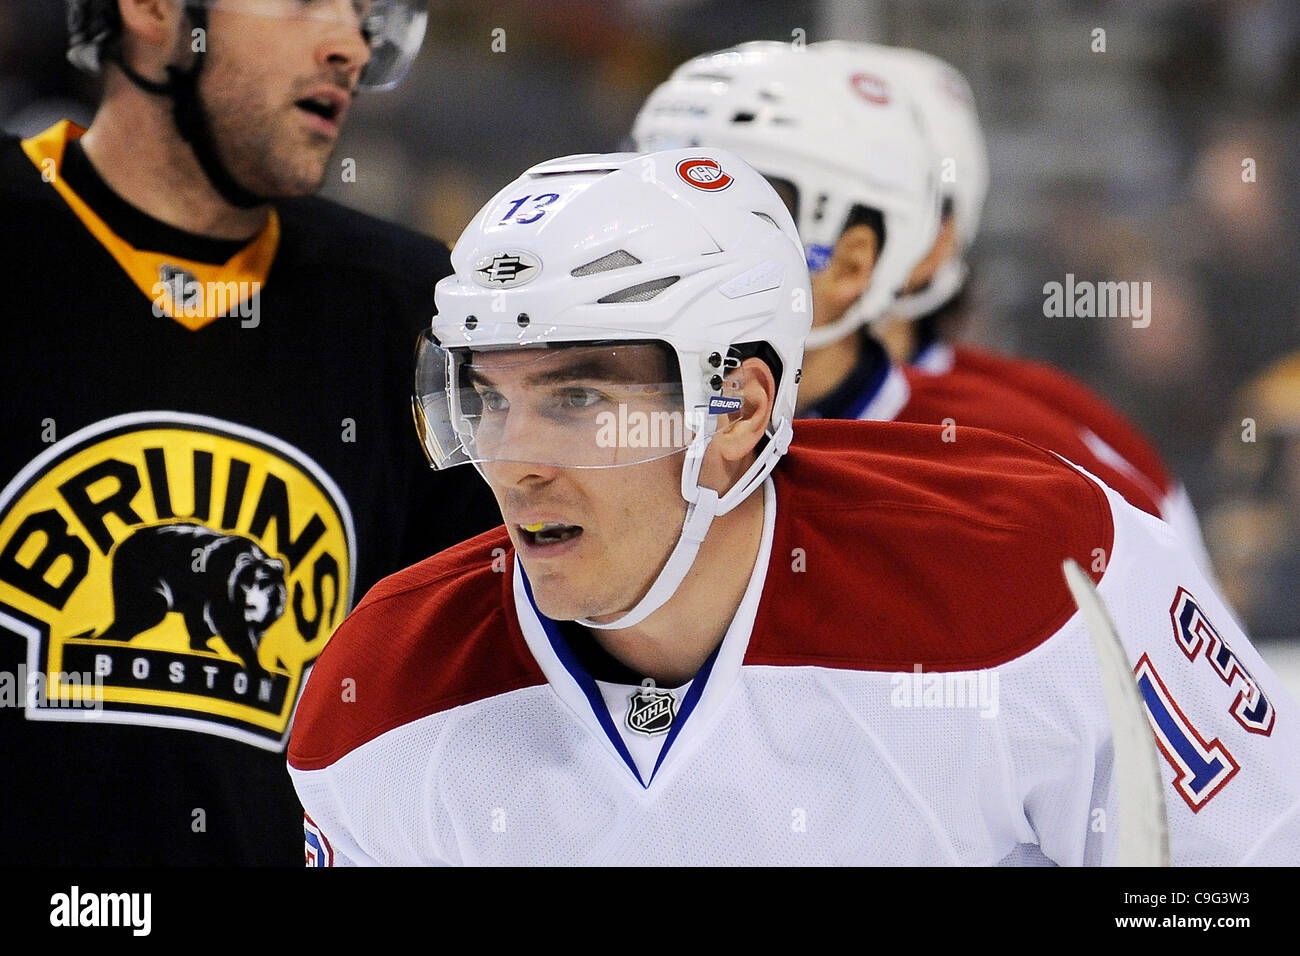 Dec. 19, 2011 - Boston, Massachusetts, U.S - Canadiens Forward, Michael Cammalleri (13) in action the during the first period of play. Bruins and Canadiens tied 1-1 (Credit Image: © Jim Melito/Southcreek/ZUMAPRESS.com) Stock Photo